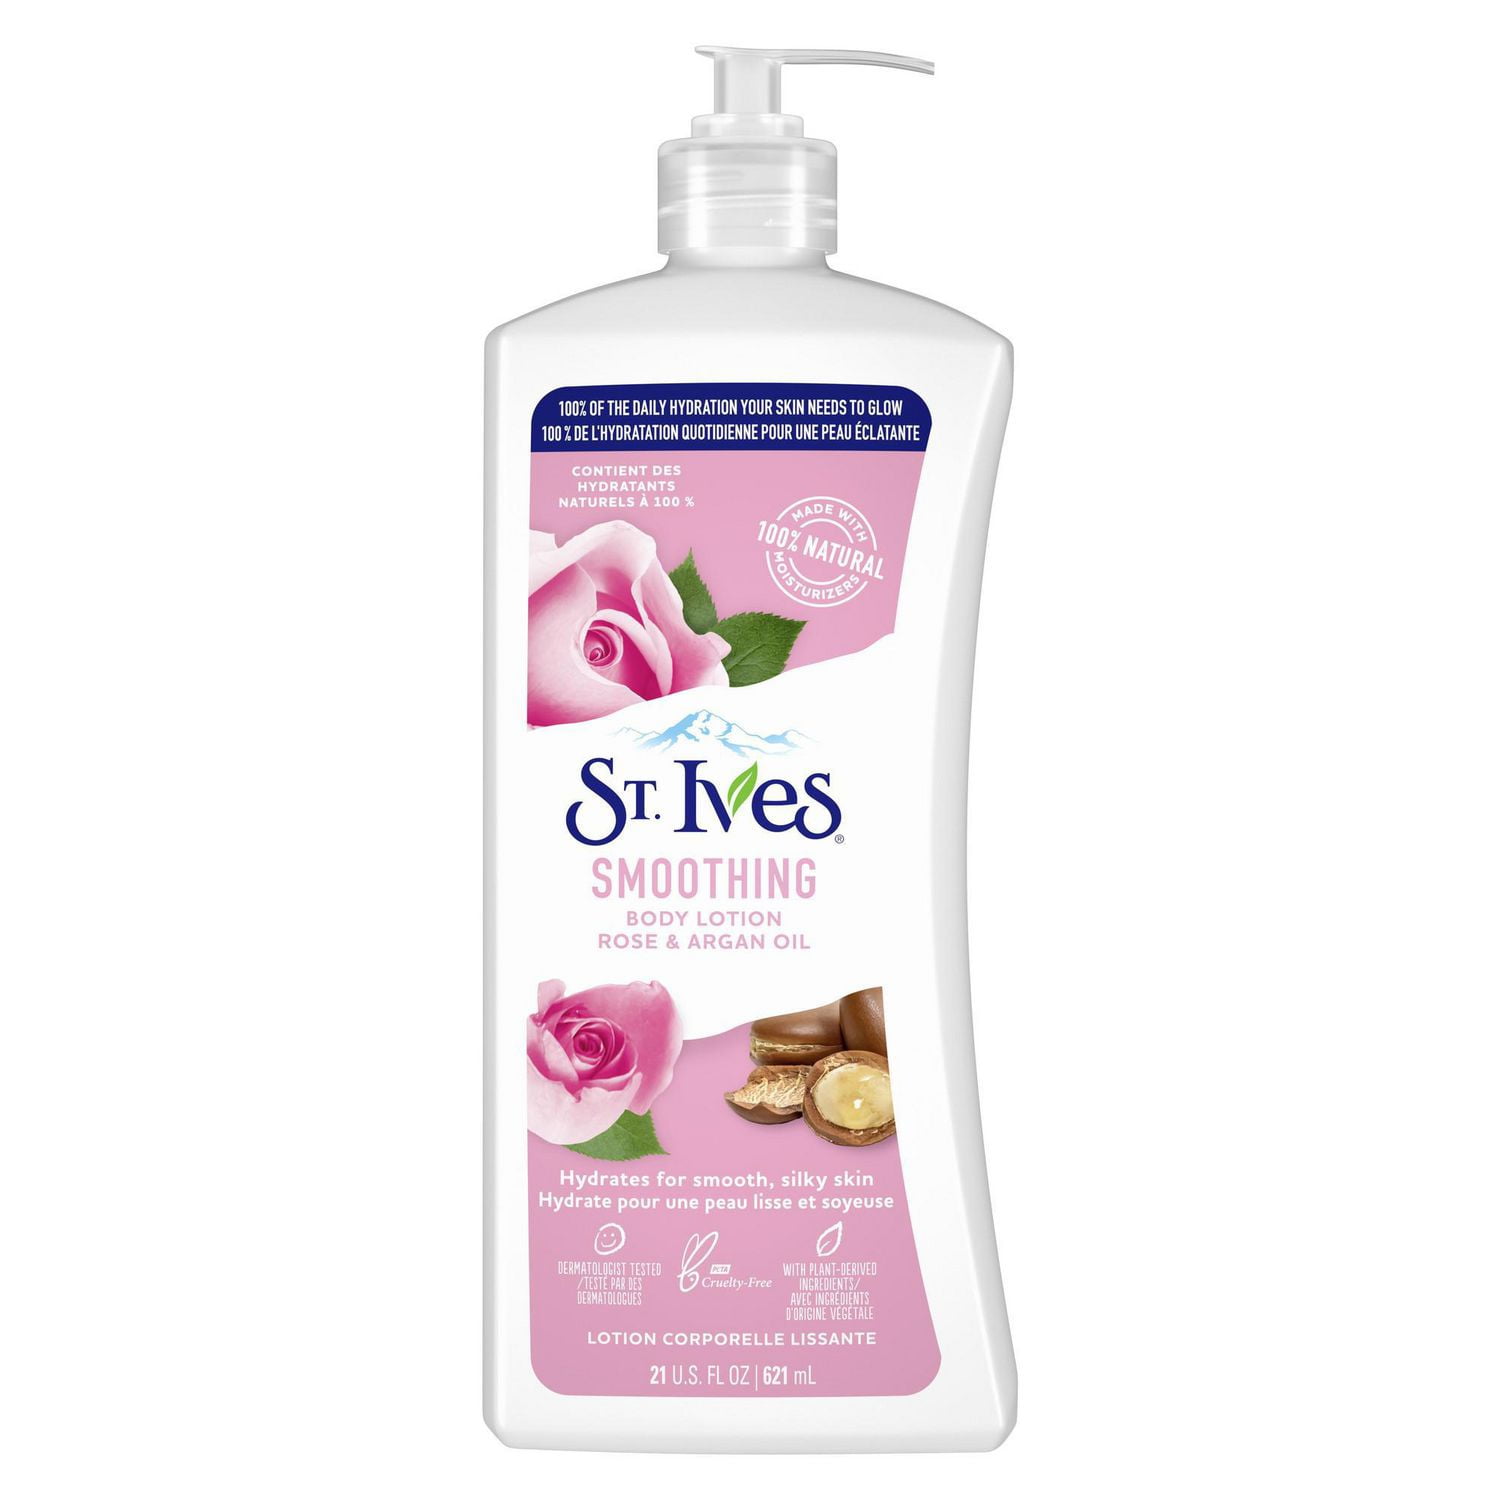 Buy NATURA BODY SILK ALOE VERA BODY LOTION + BODY SILK FAIRNESS BODY LOTION  (COMBO) (400 ml) Online at Low Prices in India 